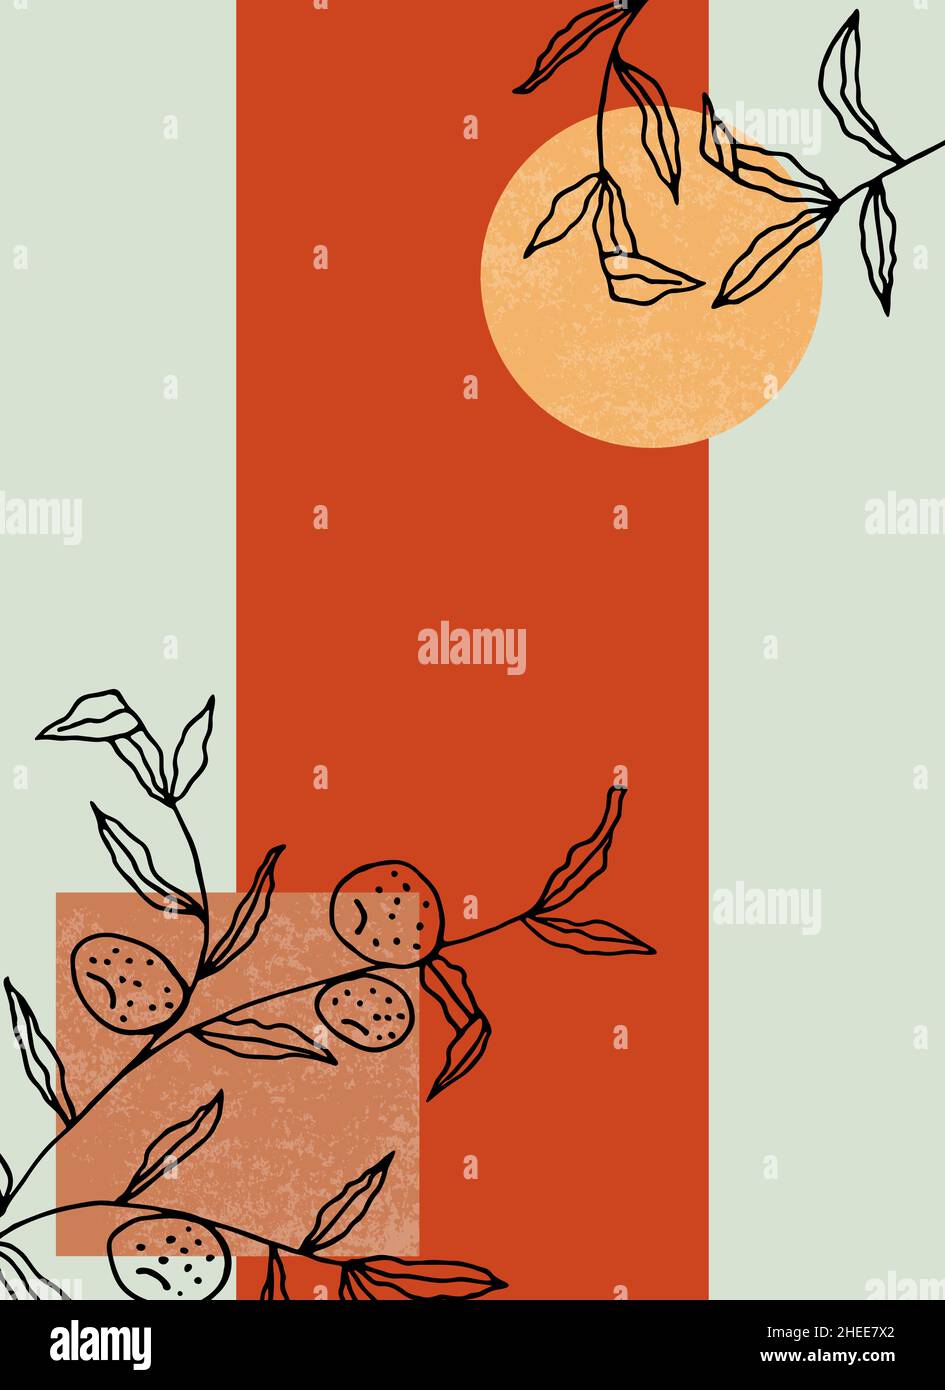 https://c8.alamy.com/comp/2HEE7X2/aesthetic-boho-abstract-print-with-black-orange-tree-outlines-scandinavian-collage-terracotta-black-pastel-green-colors-vector-background-for-2HEE7X2.jpg